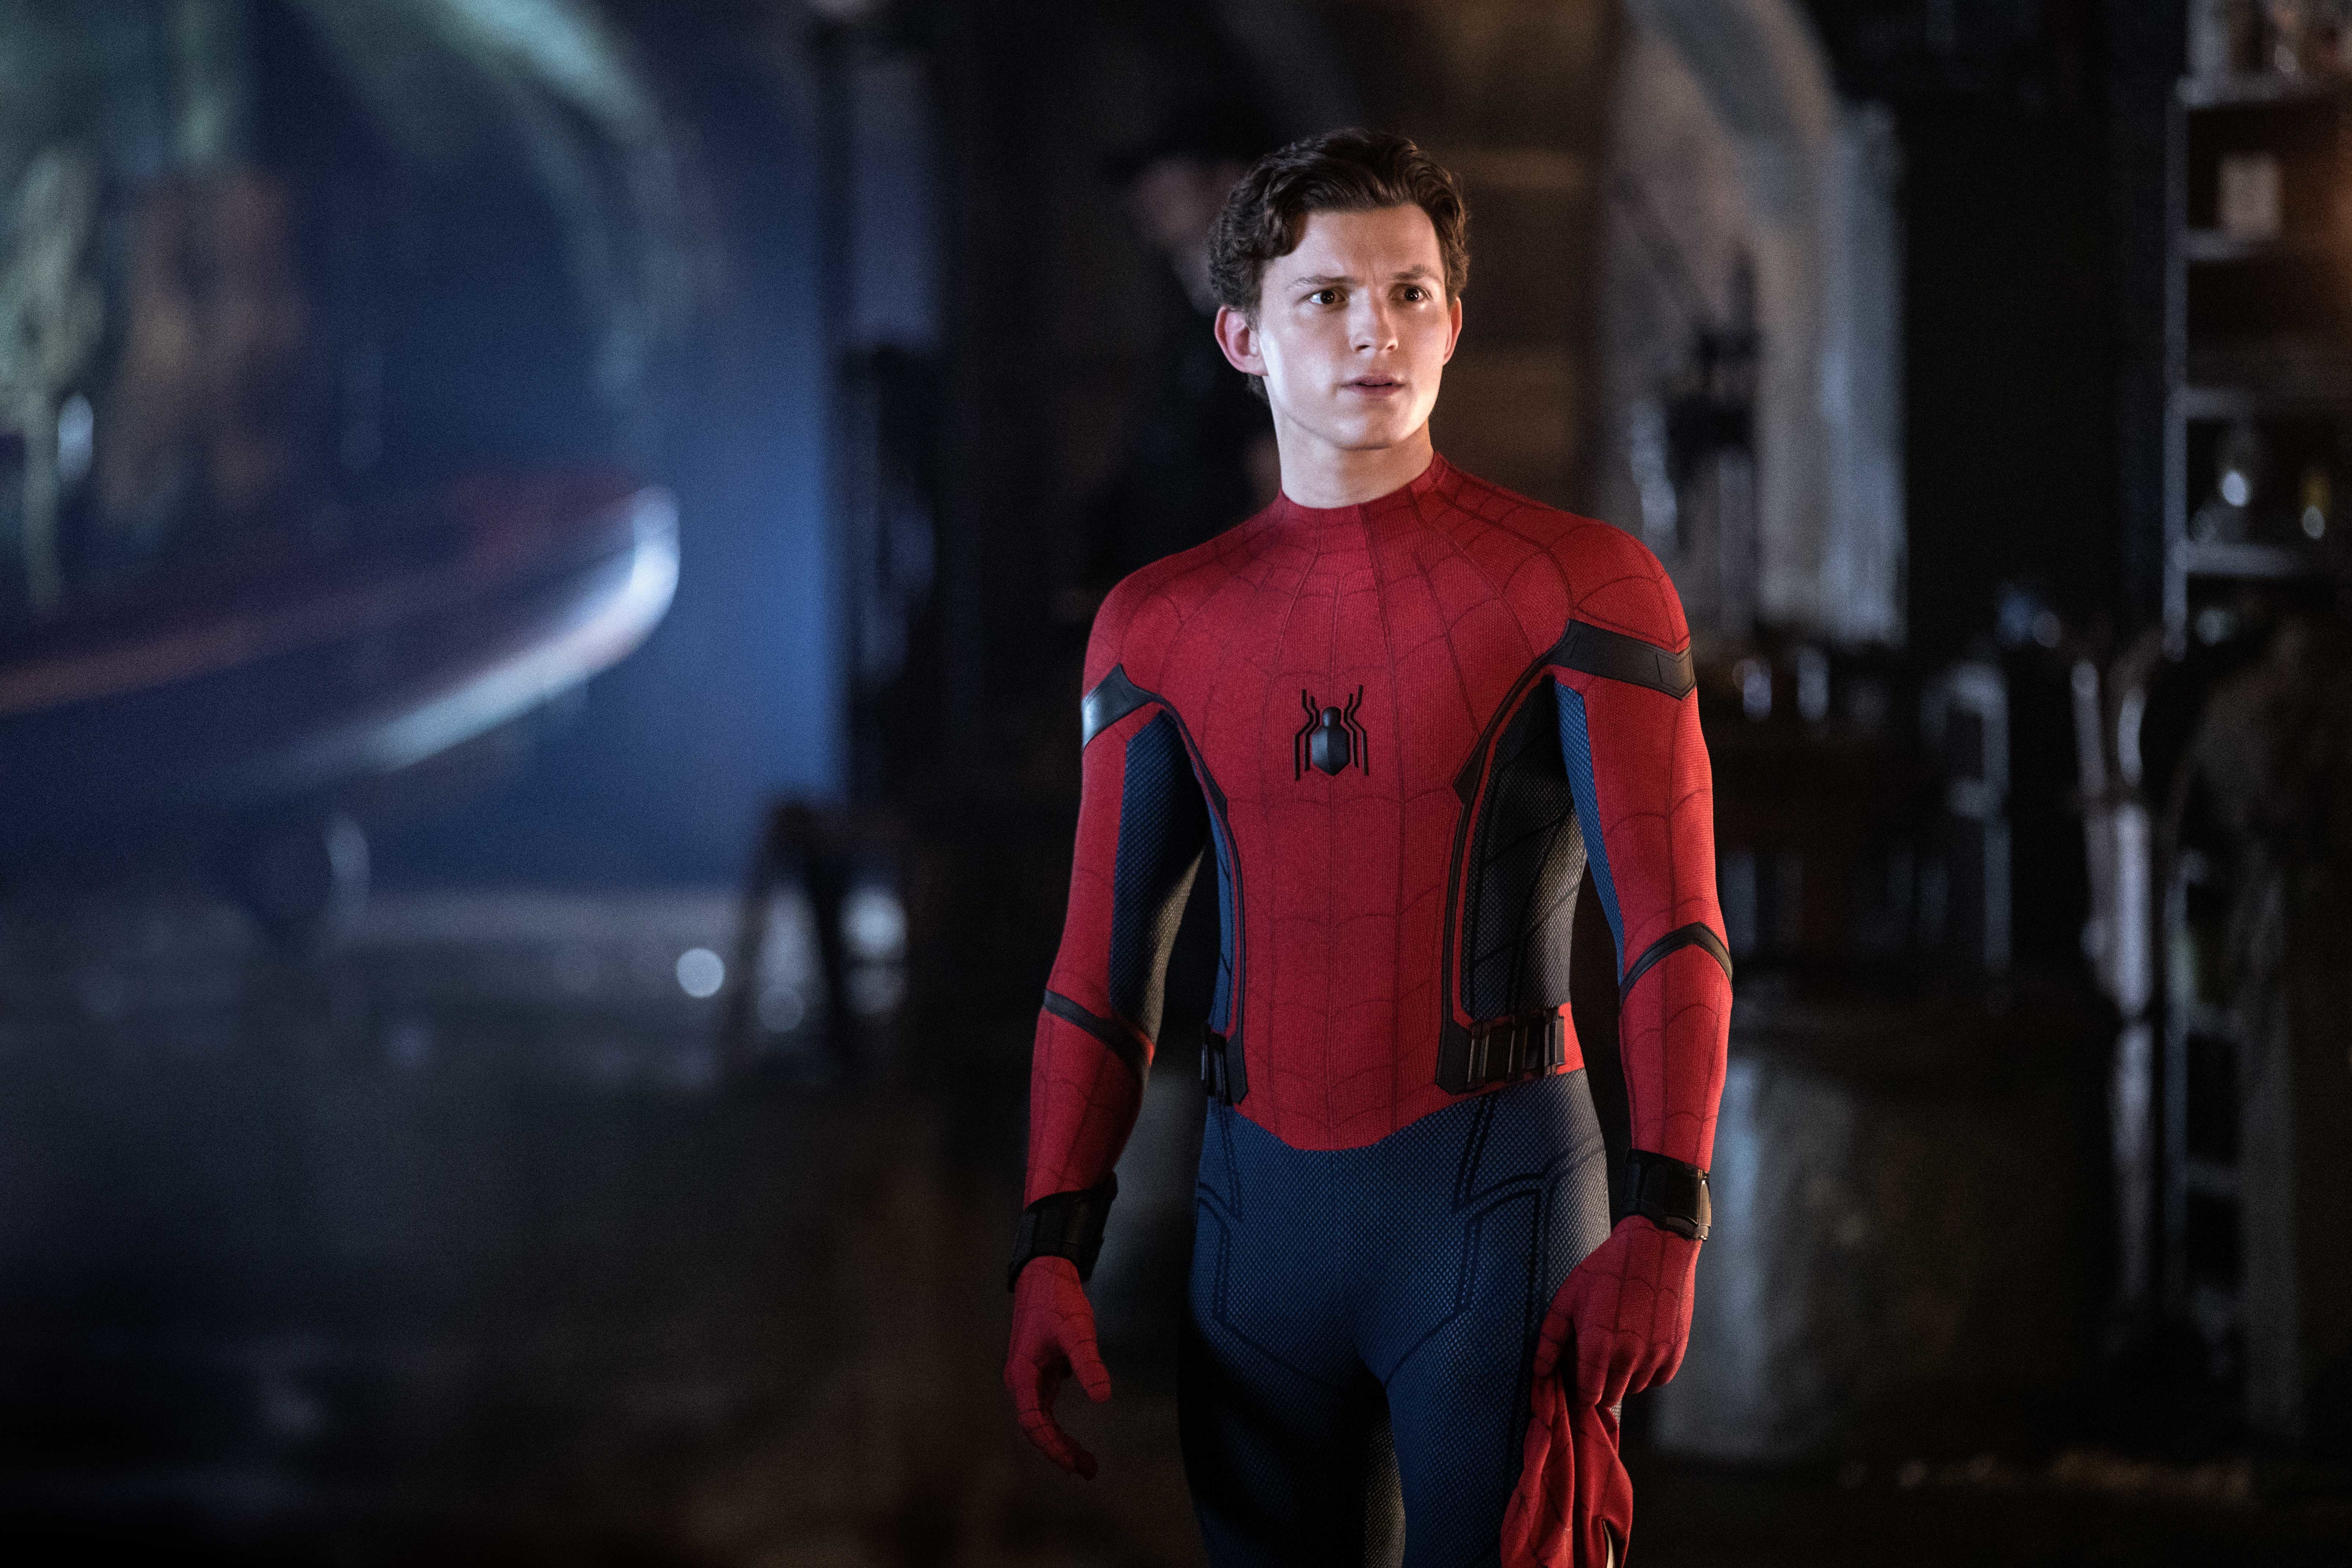 Tom Holland As Spiderman In Far From Home Wallpaper, HD Movies 4K